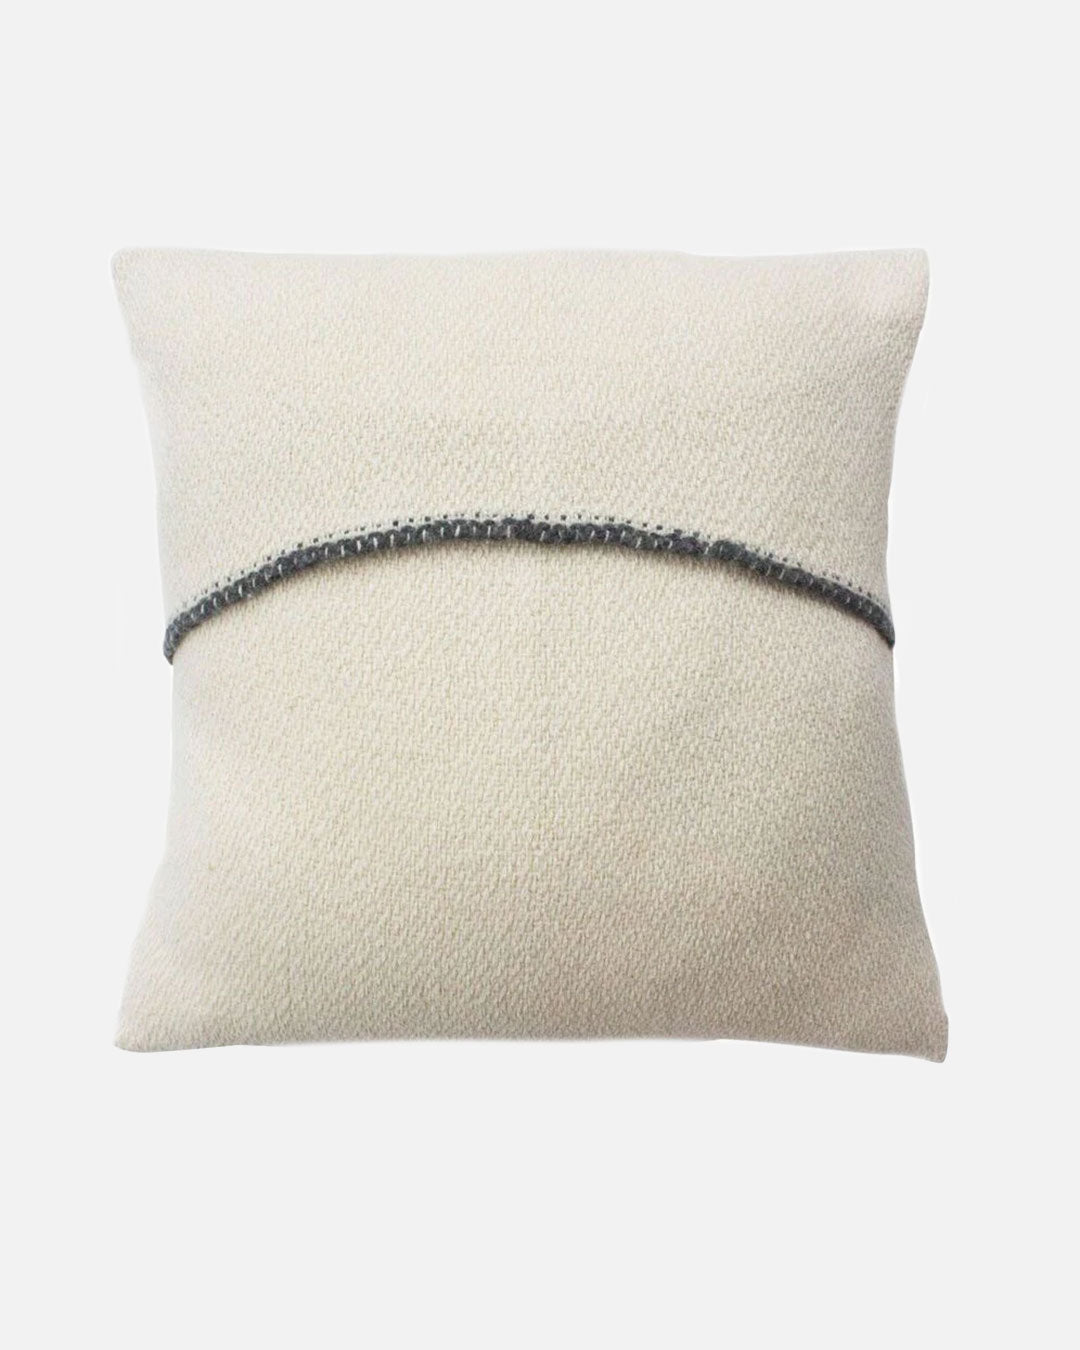 Hydra Large Square Cushion Cover in Off White